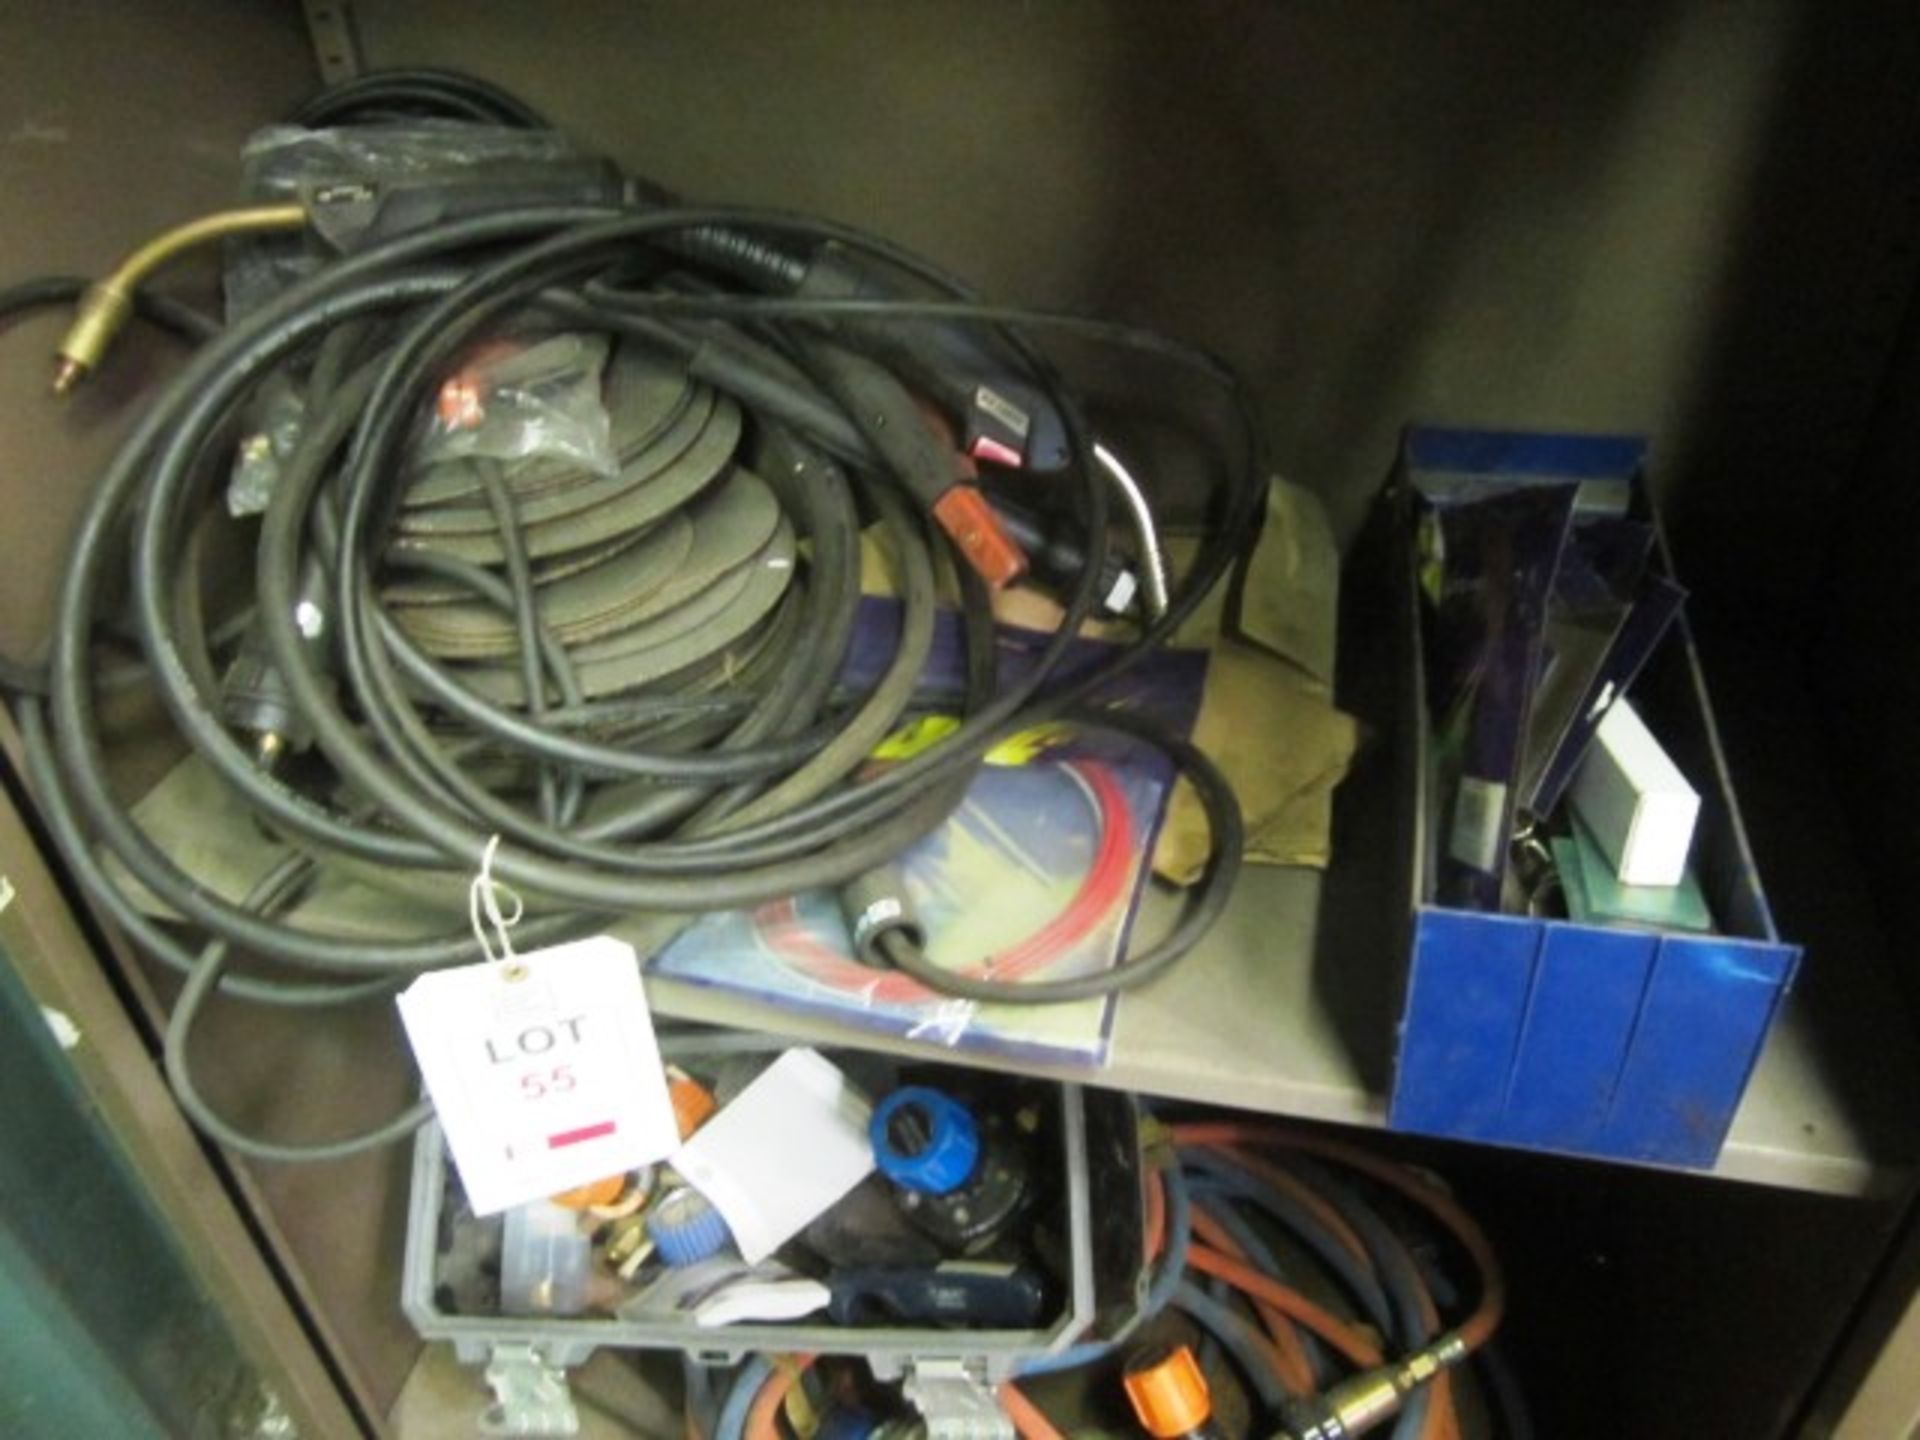 Contents of cupboard to include welding gloves and aprons, Esab Autrod 5356 welding wire, - Image 3 of 8